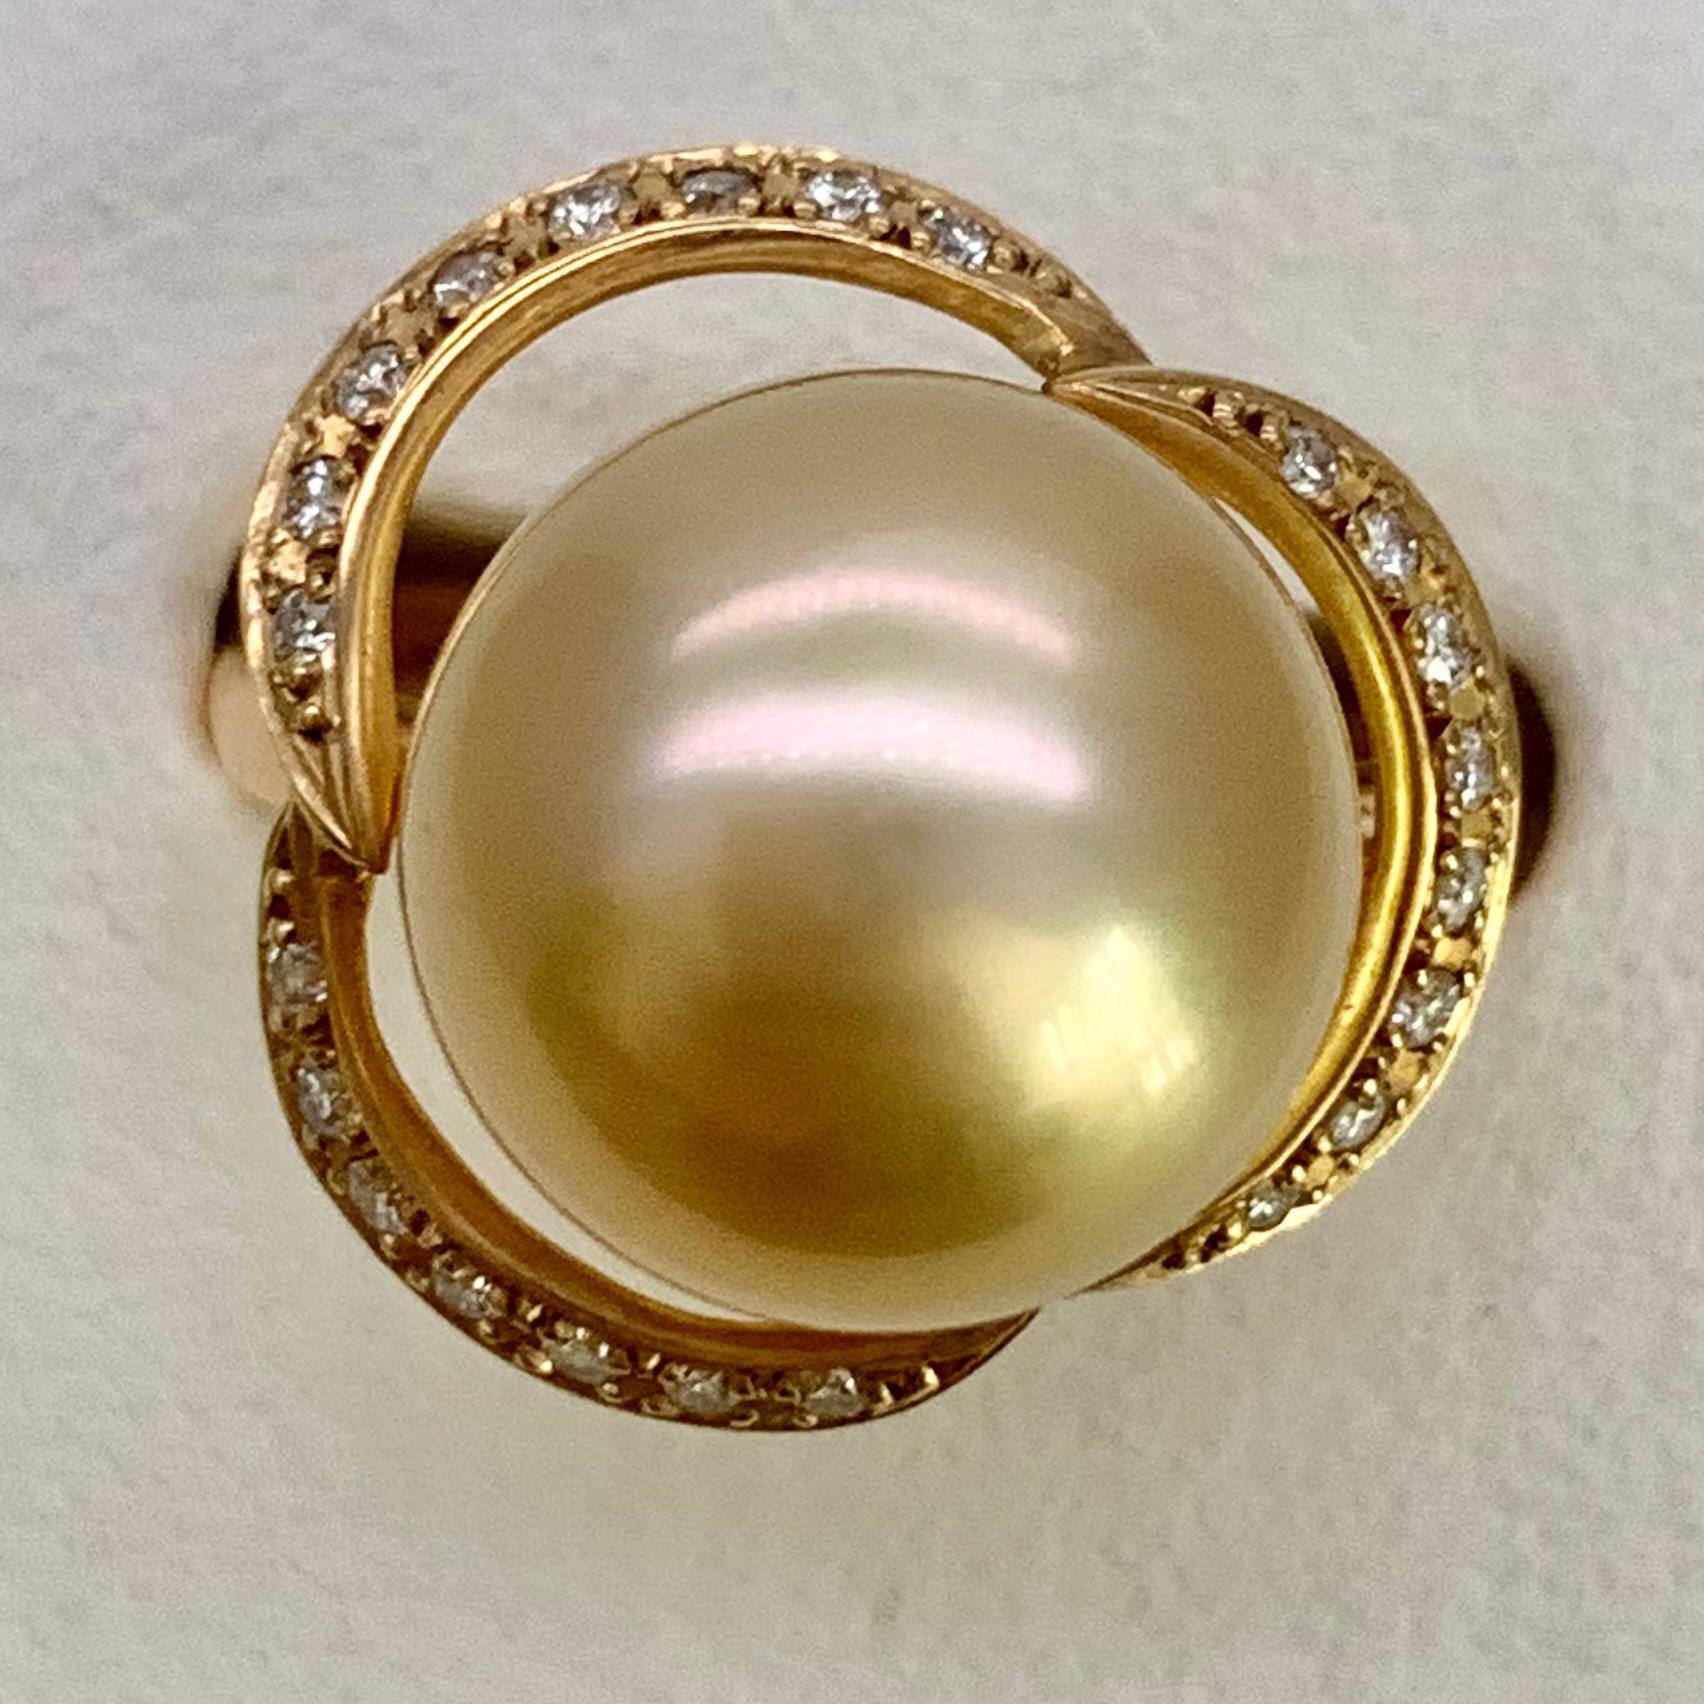 Gold South Sea Pearl Gold Diamond Ring, 'R55' For Sale 1